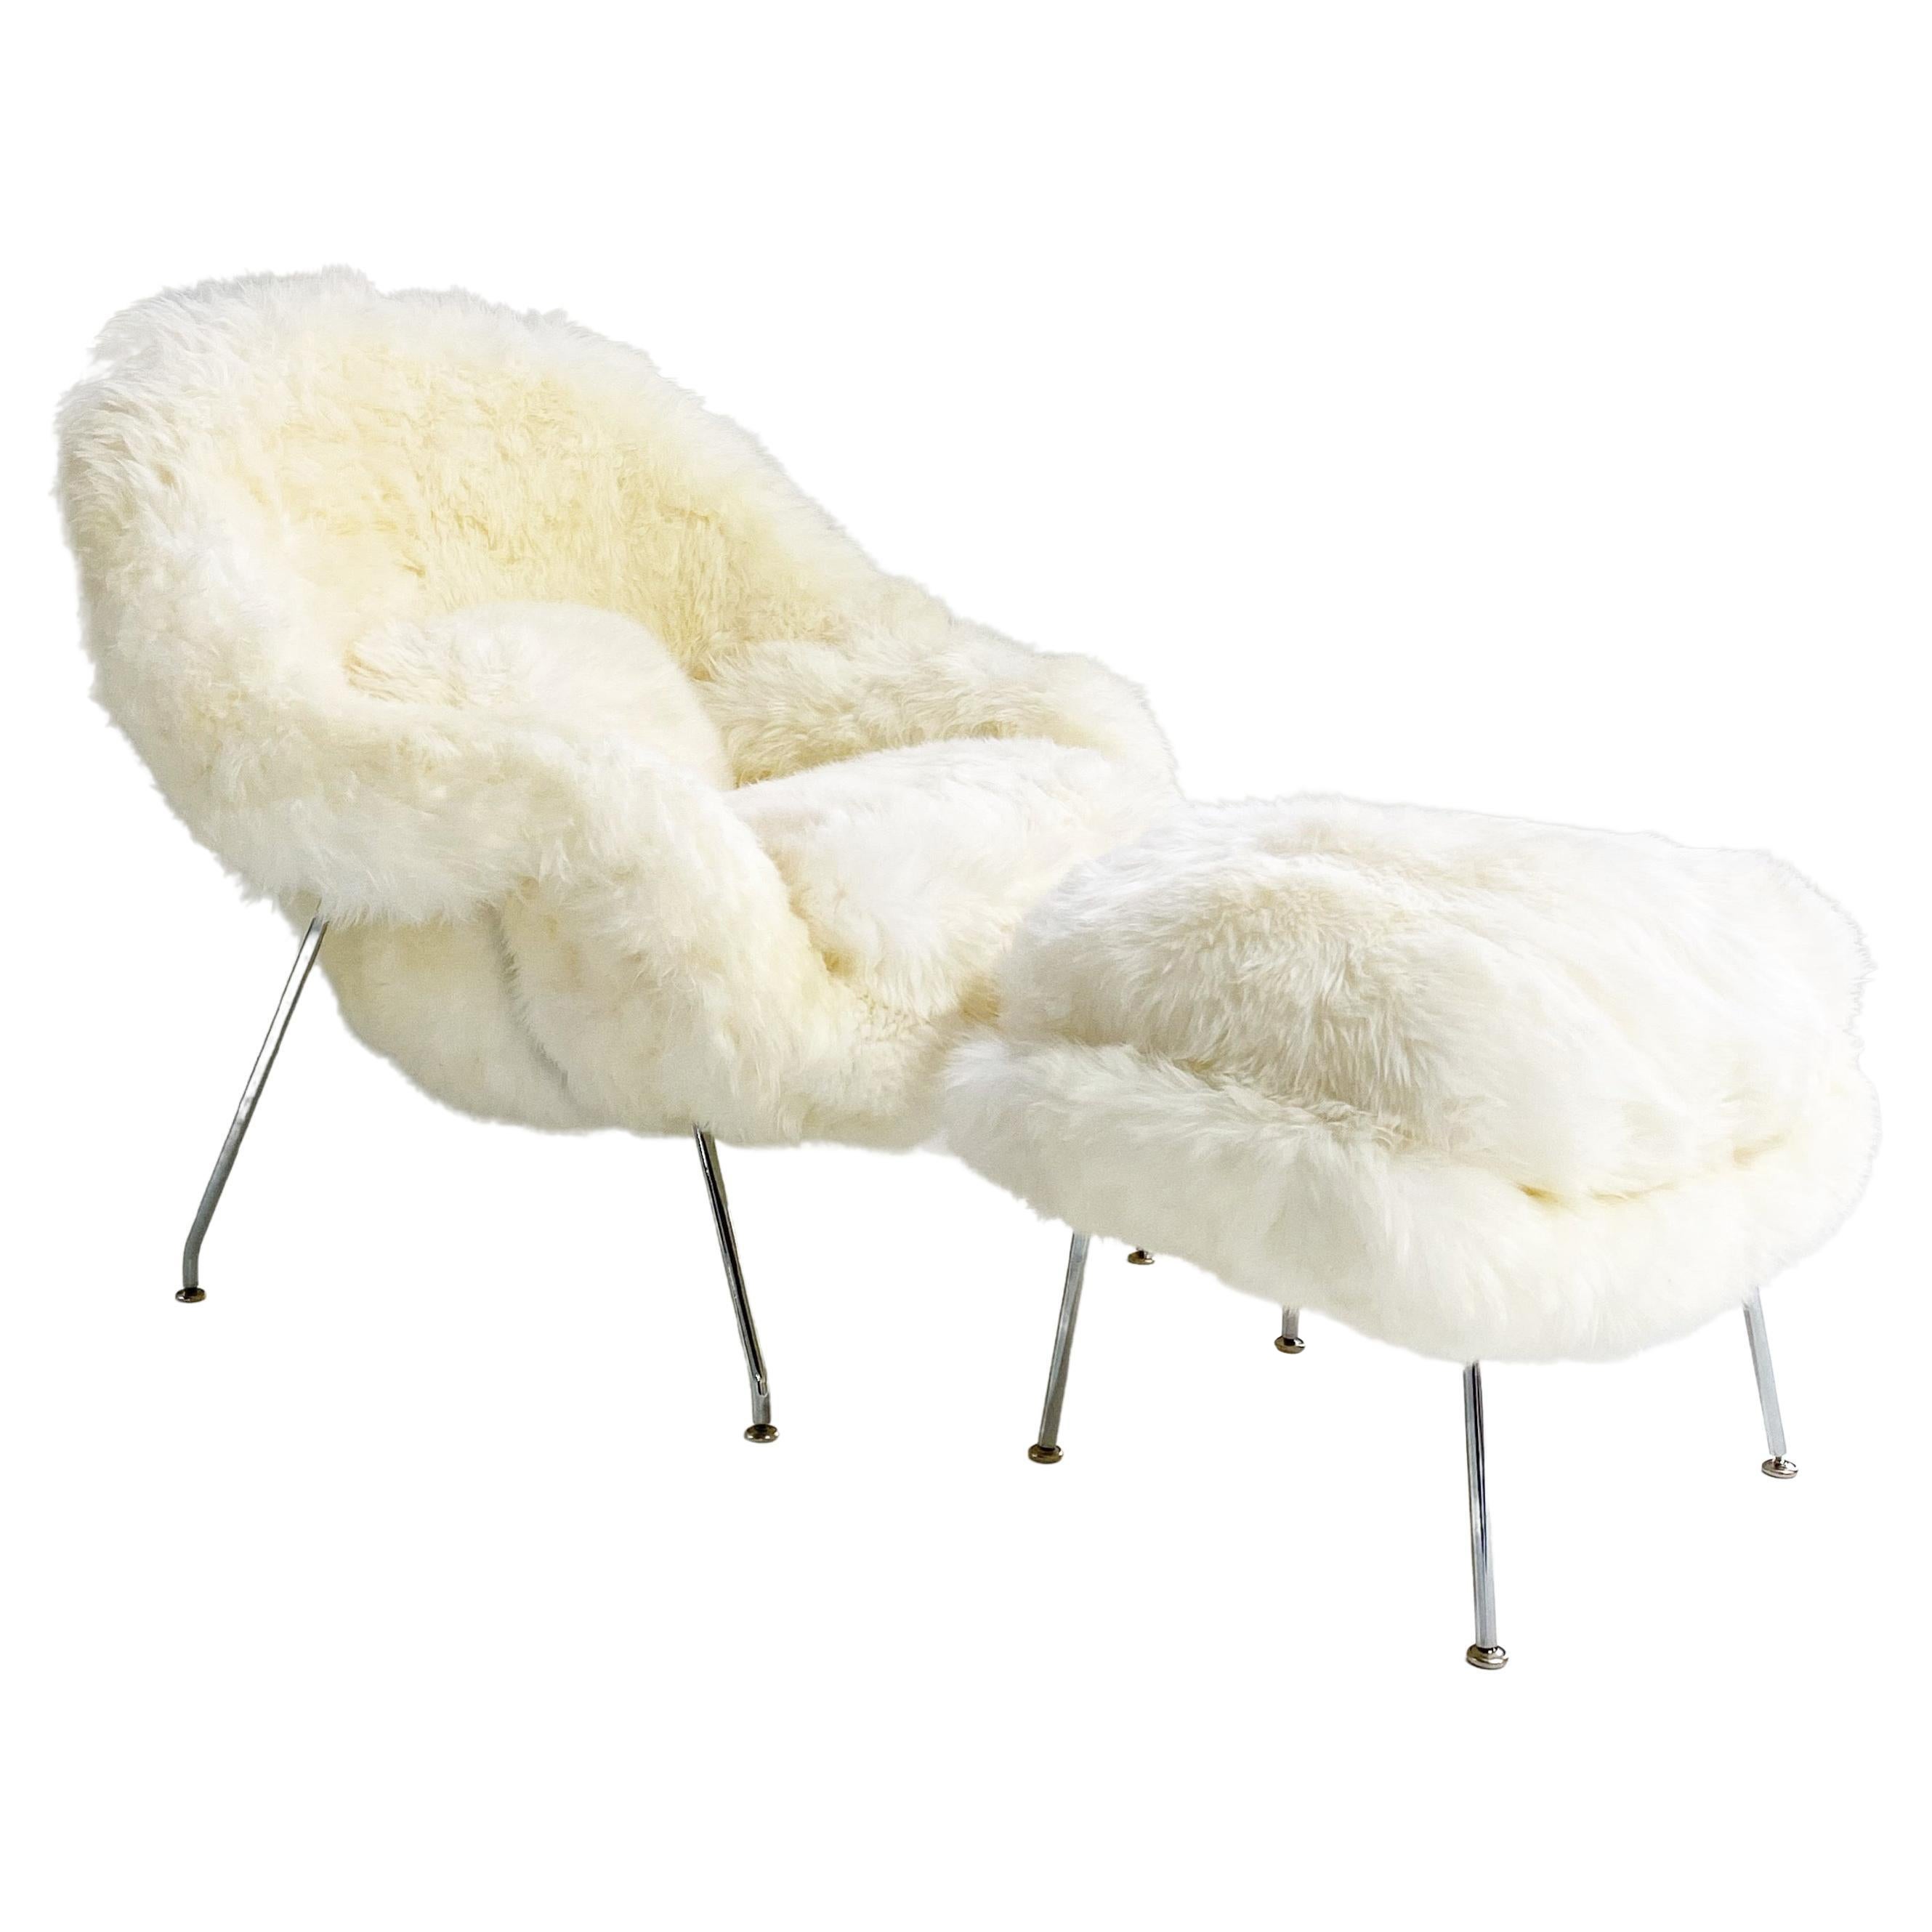 Forsyth Bespoke Womb Chair and Ottoman in New Zealand Sheepskin, Ivory